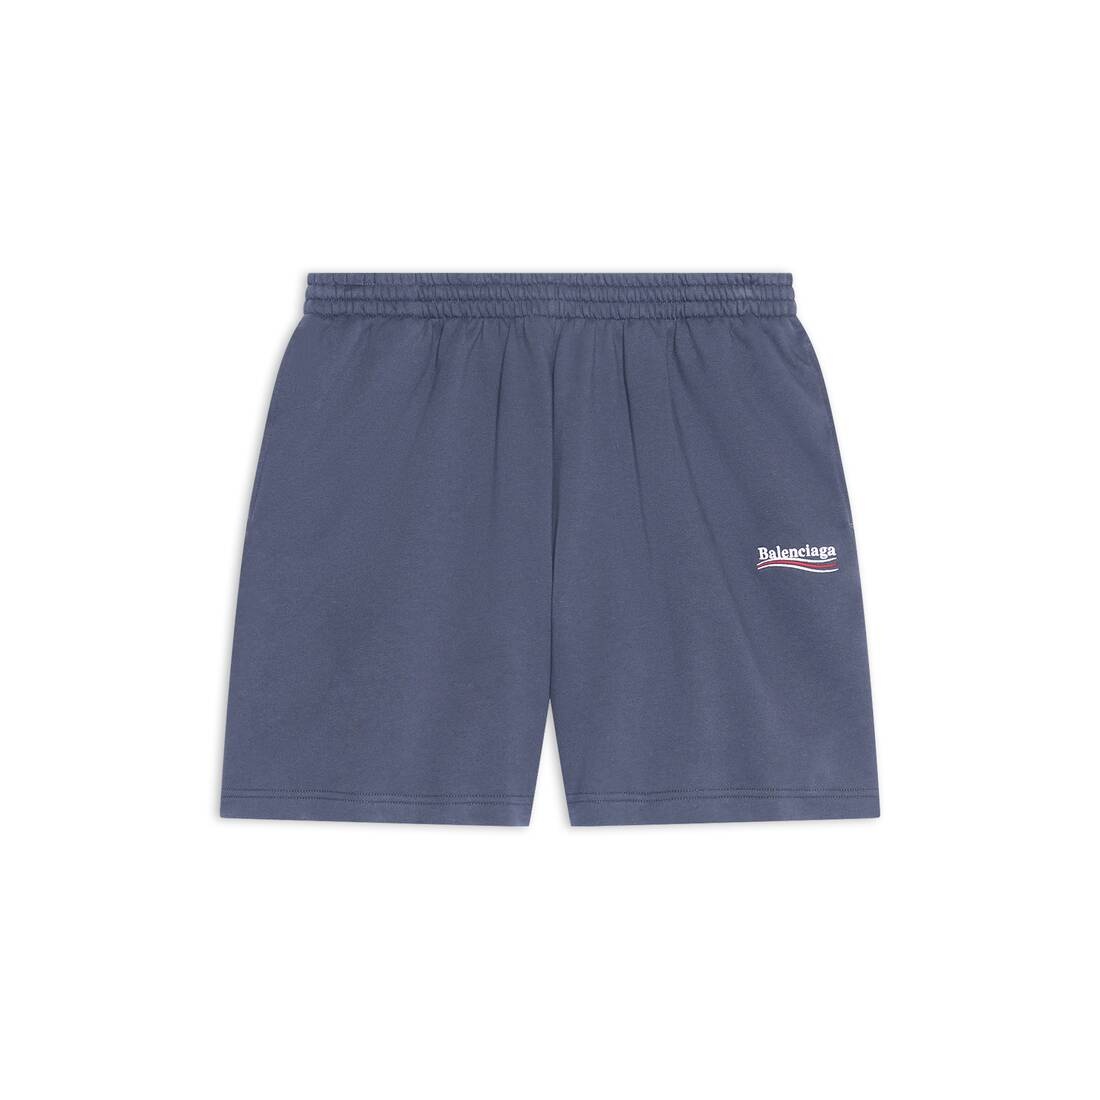 Men's Political Campaign Sweat Shorts in Grey - 1